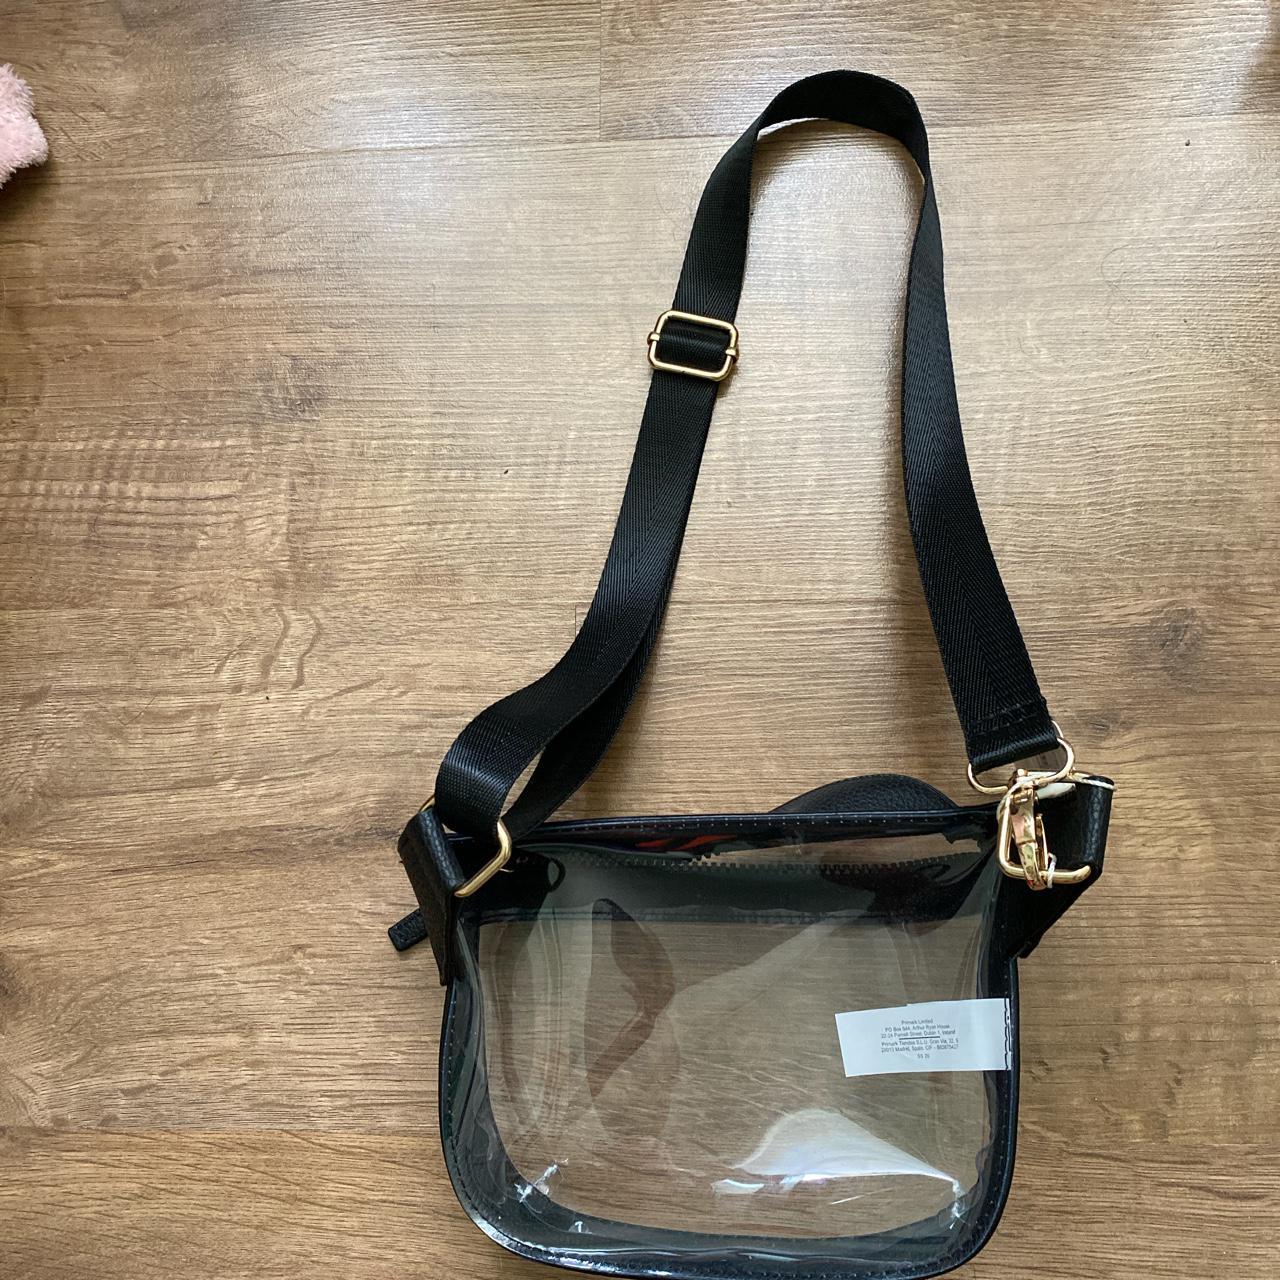 Product Image 2 - Primary clear fanny pack/travel bum